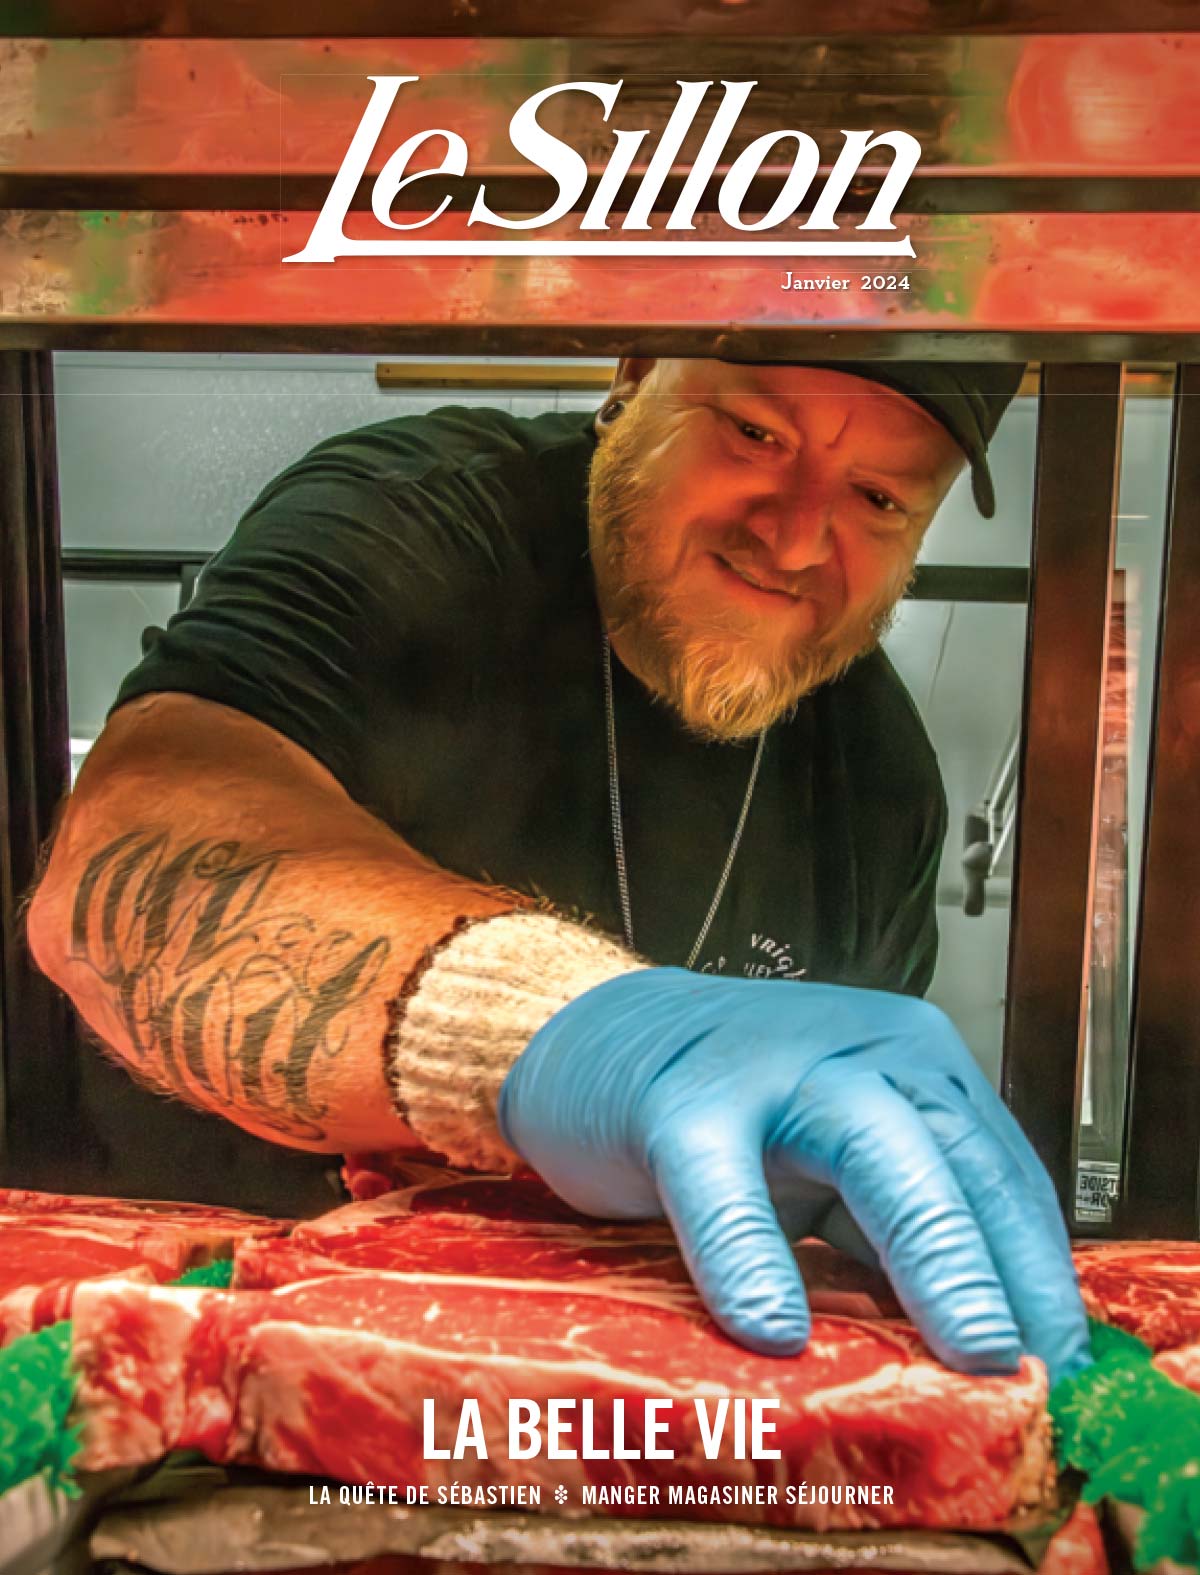 a chef with tattooed arm and light blue latex glove on inspecting a steak